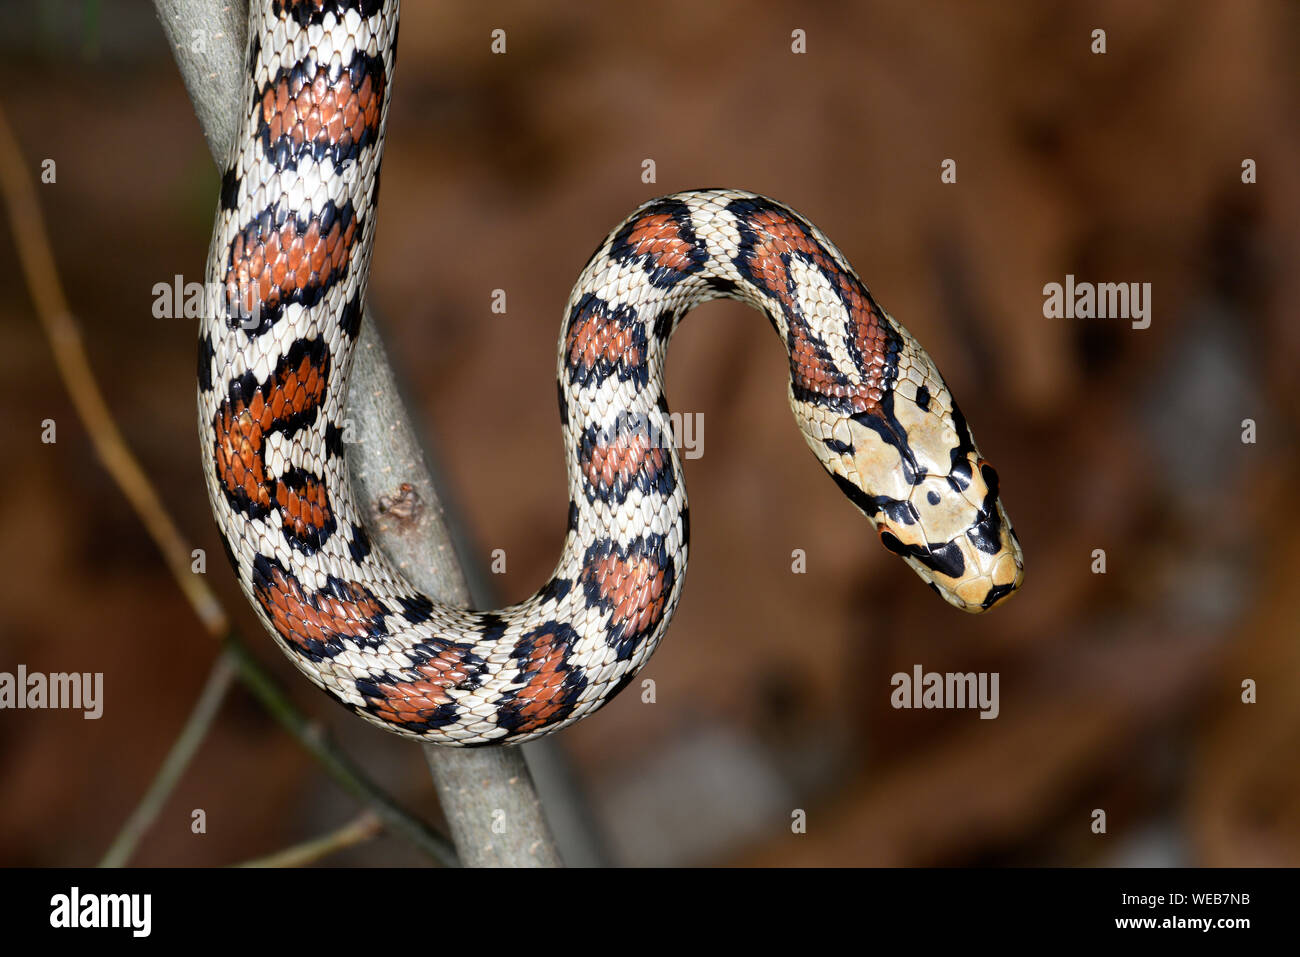 European Leopard or Ratsnake (Zamenis situla) curled up on tree branch, Bulgaria, April Stock Photo